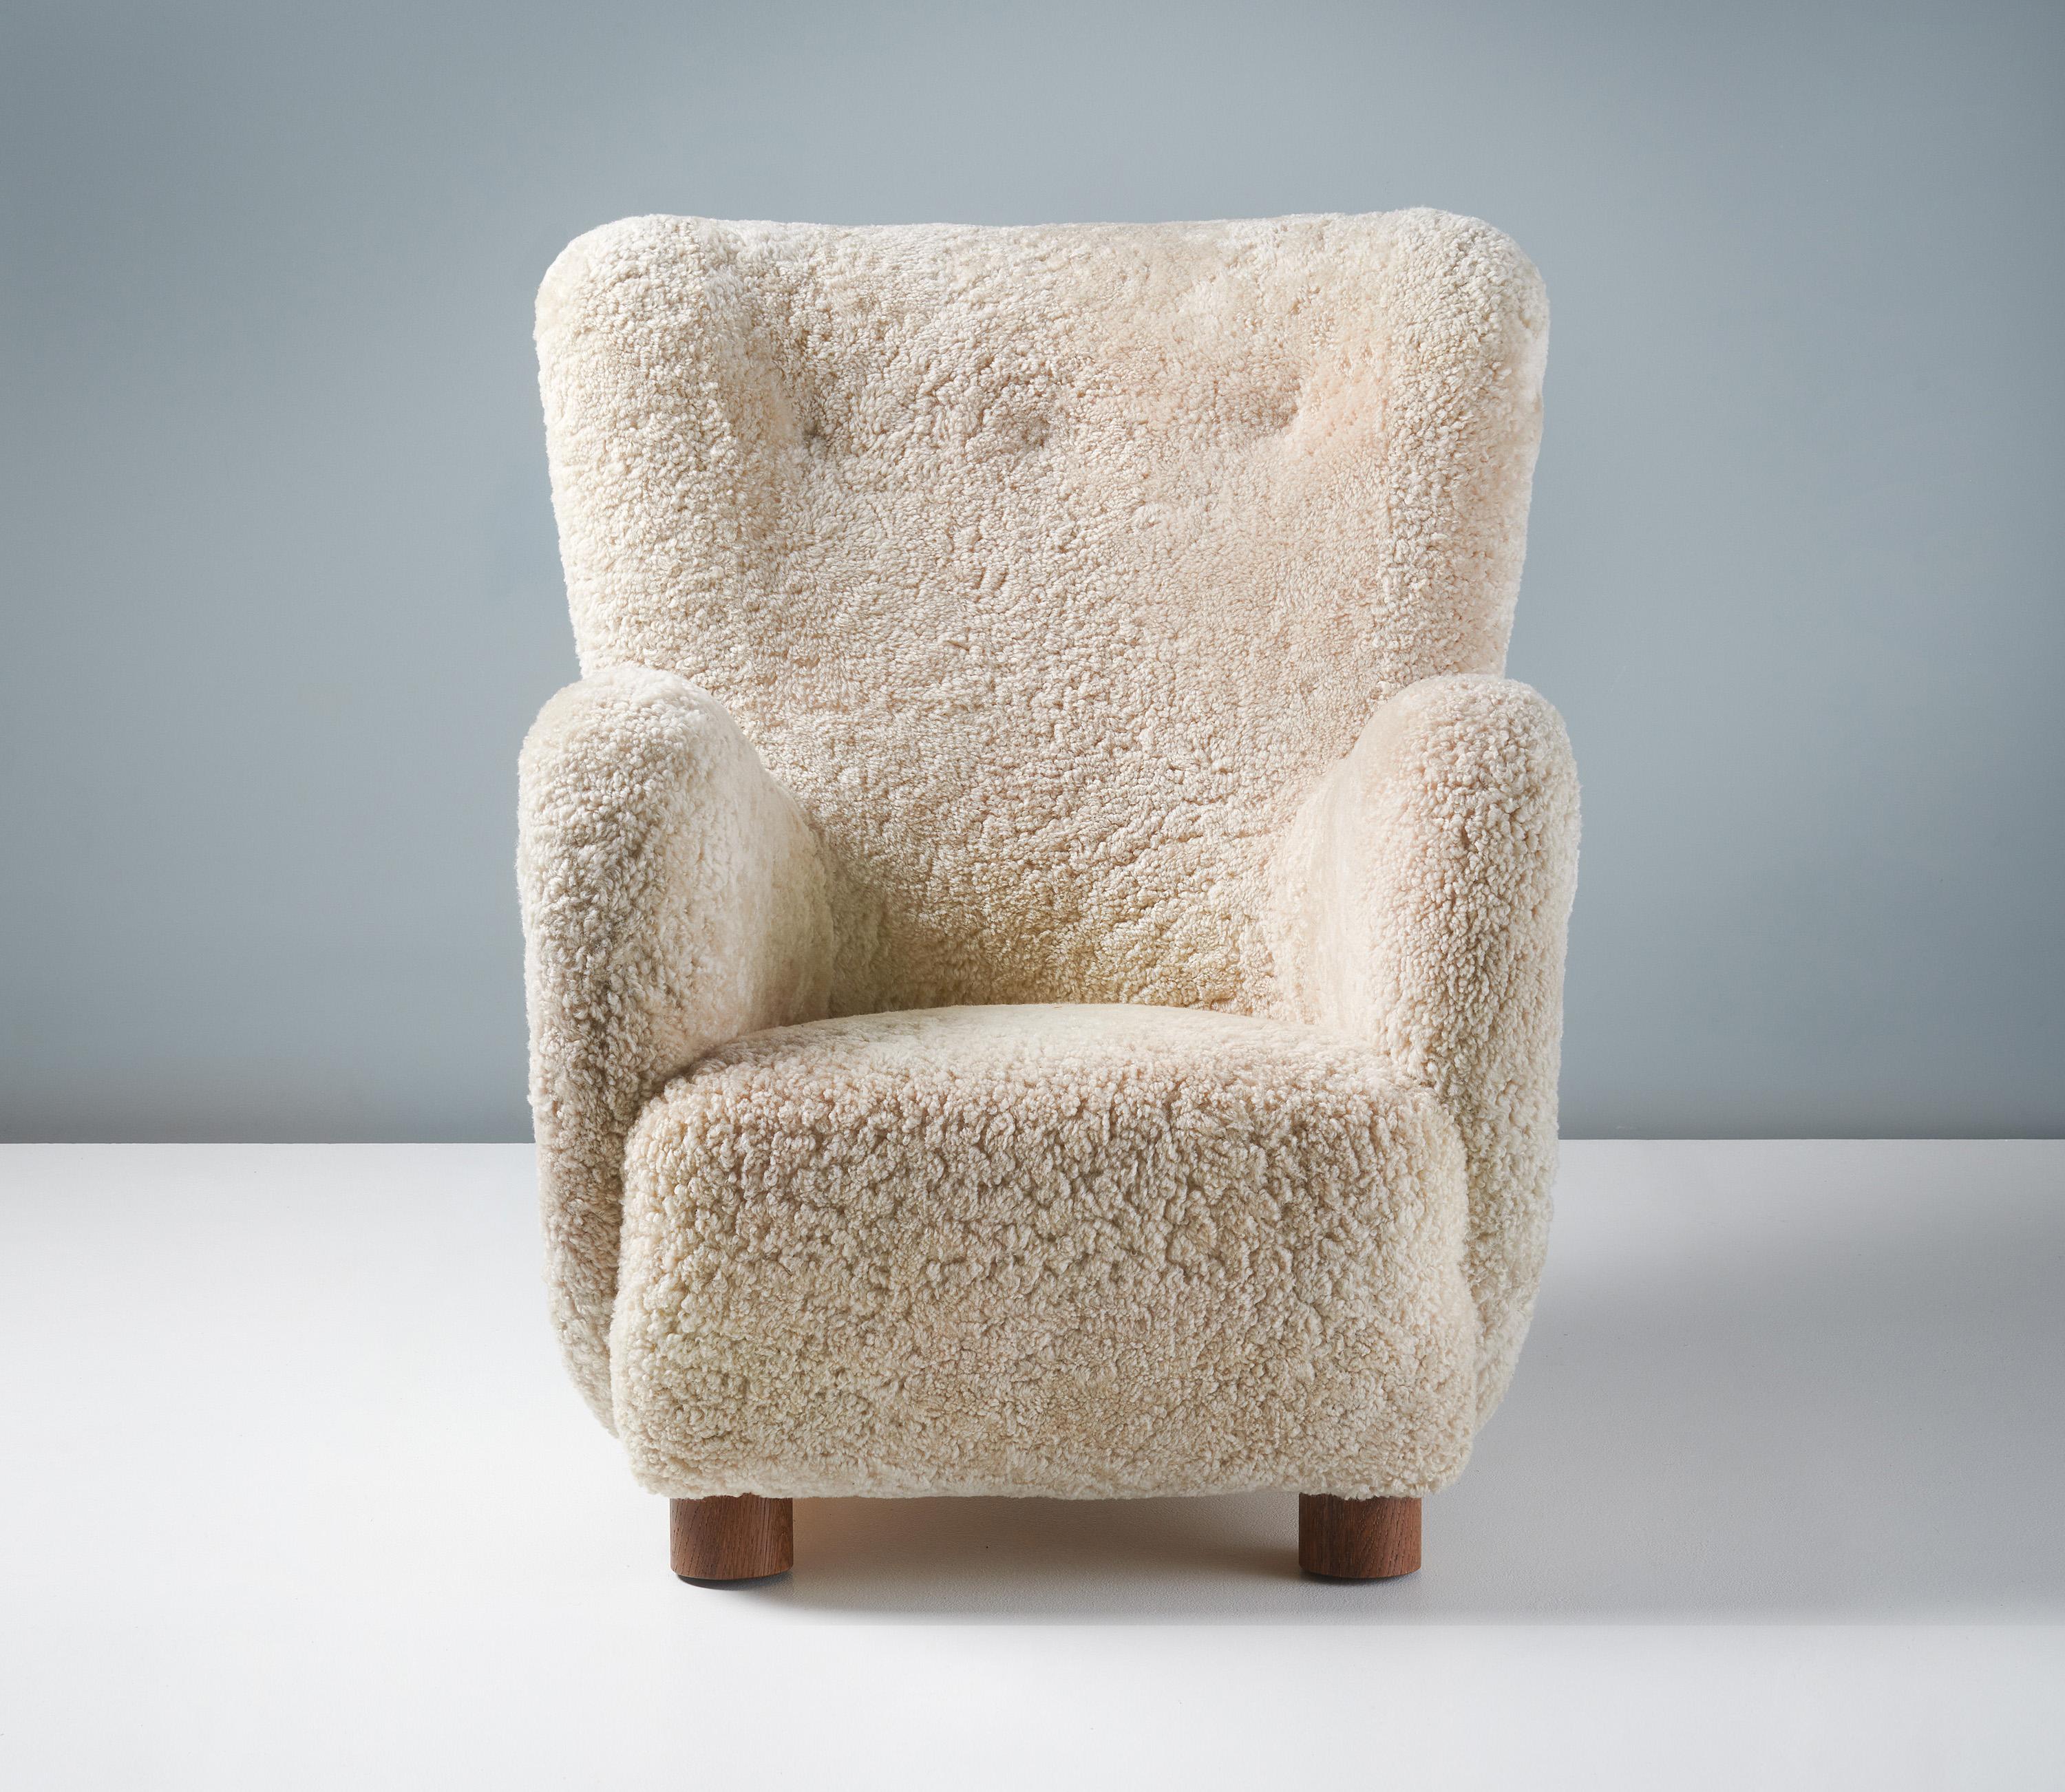 Danish Cabinetmaker Sheepskin Armchair, circa 1940s.

This tall lounge chair produced by a Danish Cabinetmaker in the 1940s is typical of Danish lounge chair designs of the day. It features a slightly curved wing-back with large round arms and